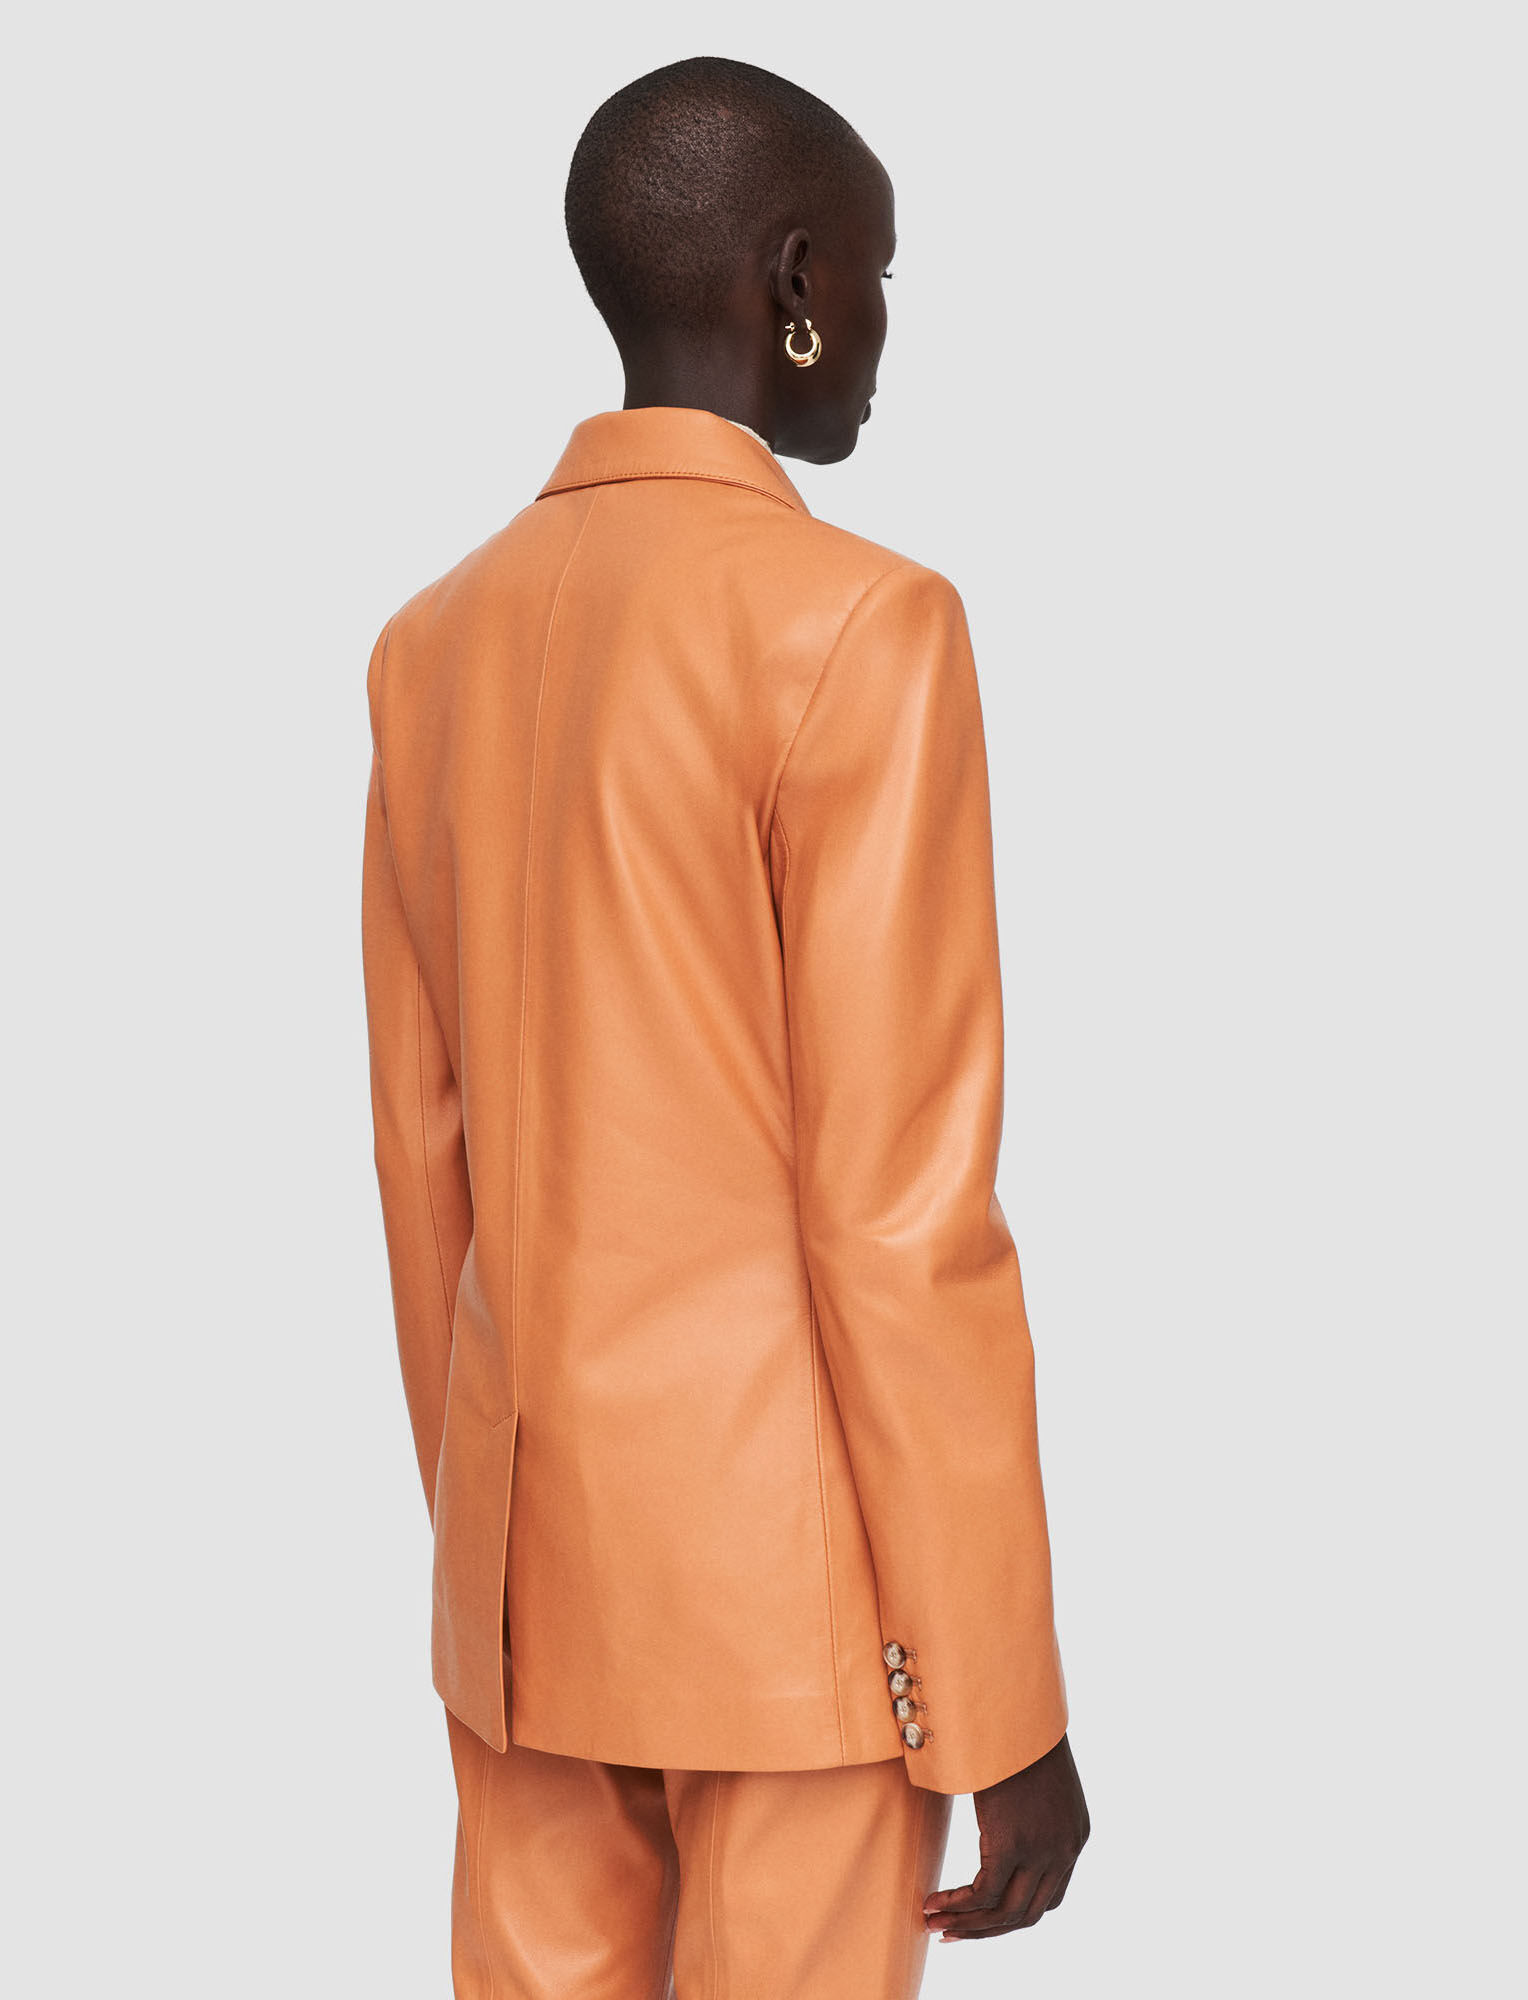 Joseph, Nappa Leather Jacques Jacket, in Caramel